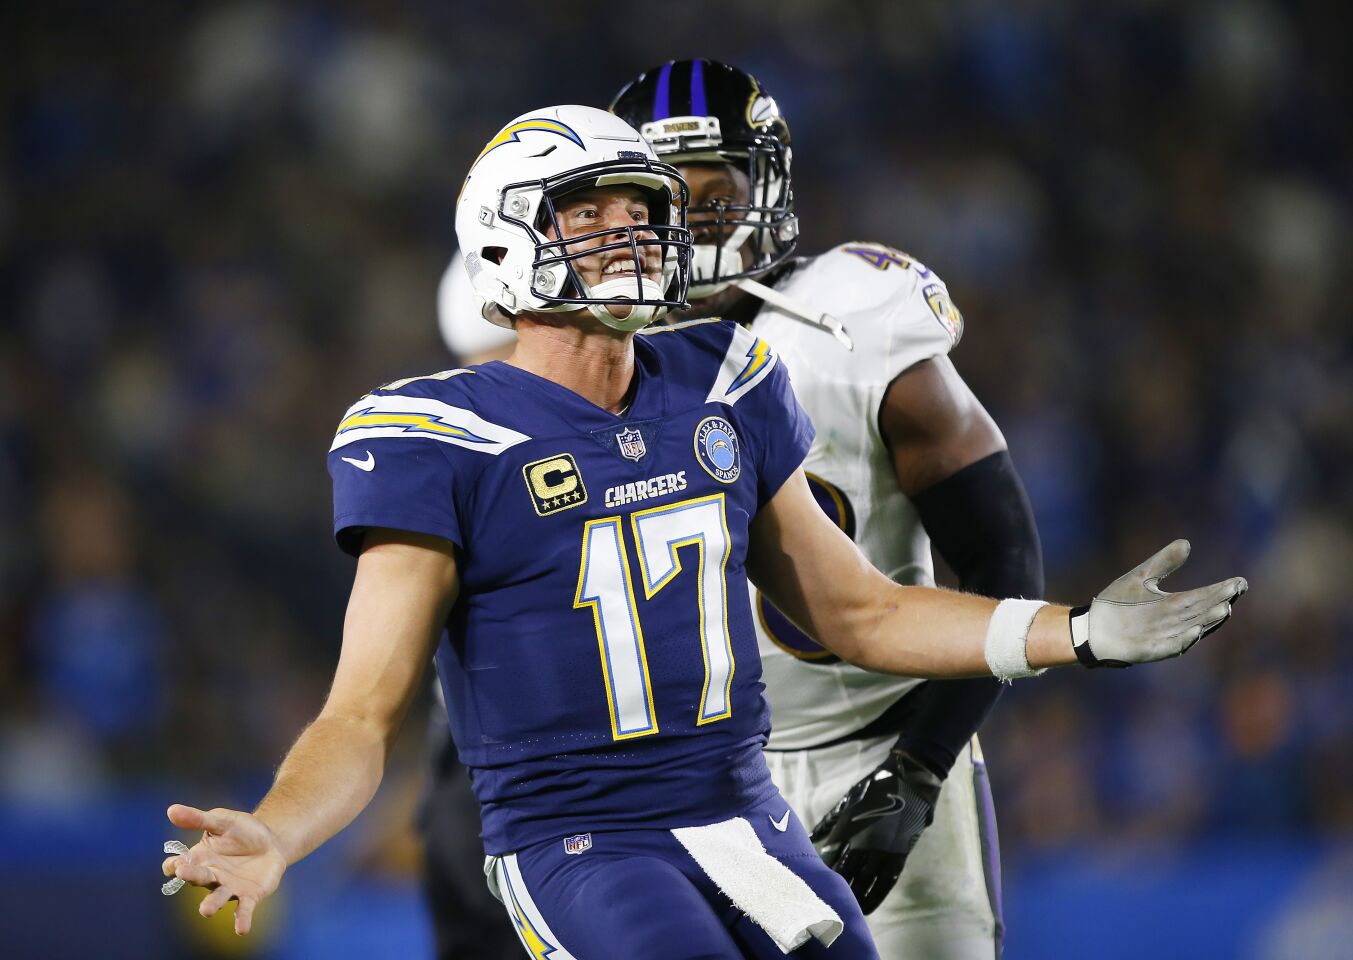 Los Angeles Chargers Philip Rivers argues a call against Keenan Allen in the 1st quarter against the Baltimore Ravens in Carson on Saturday, Dec. 22, 2018.